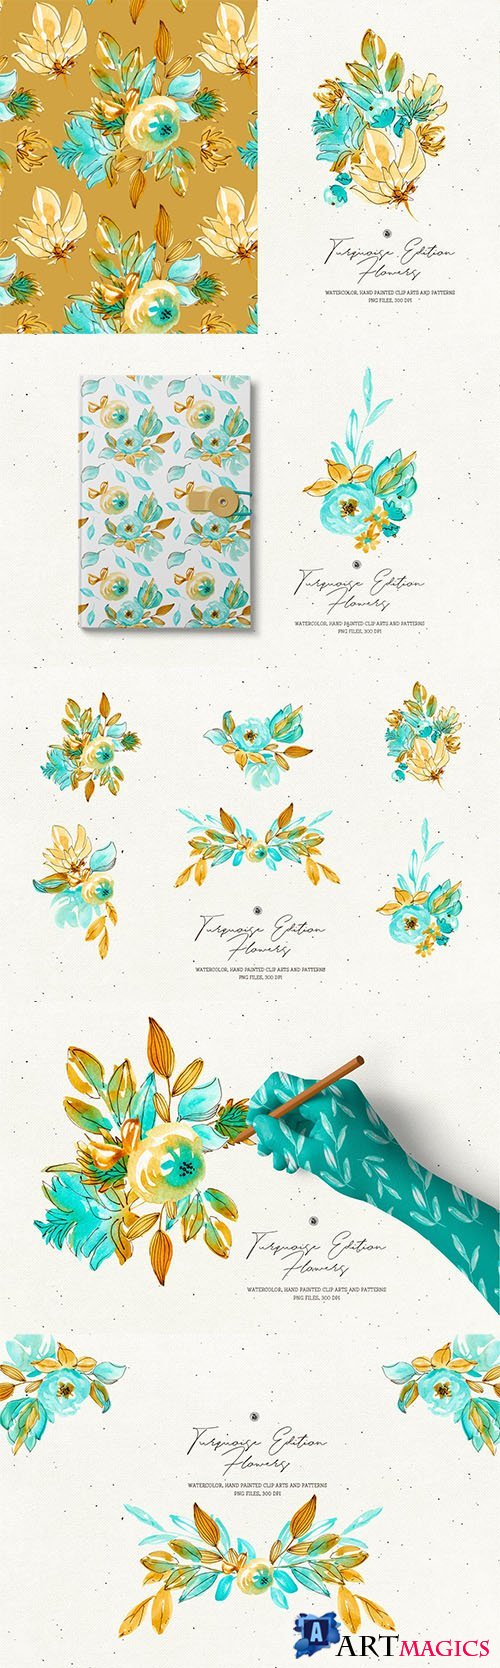 Turquoise Edition Flowers - 3693848